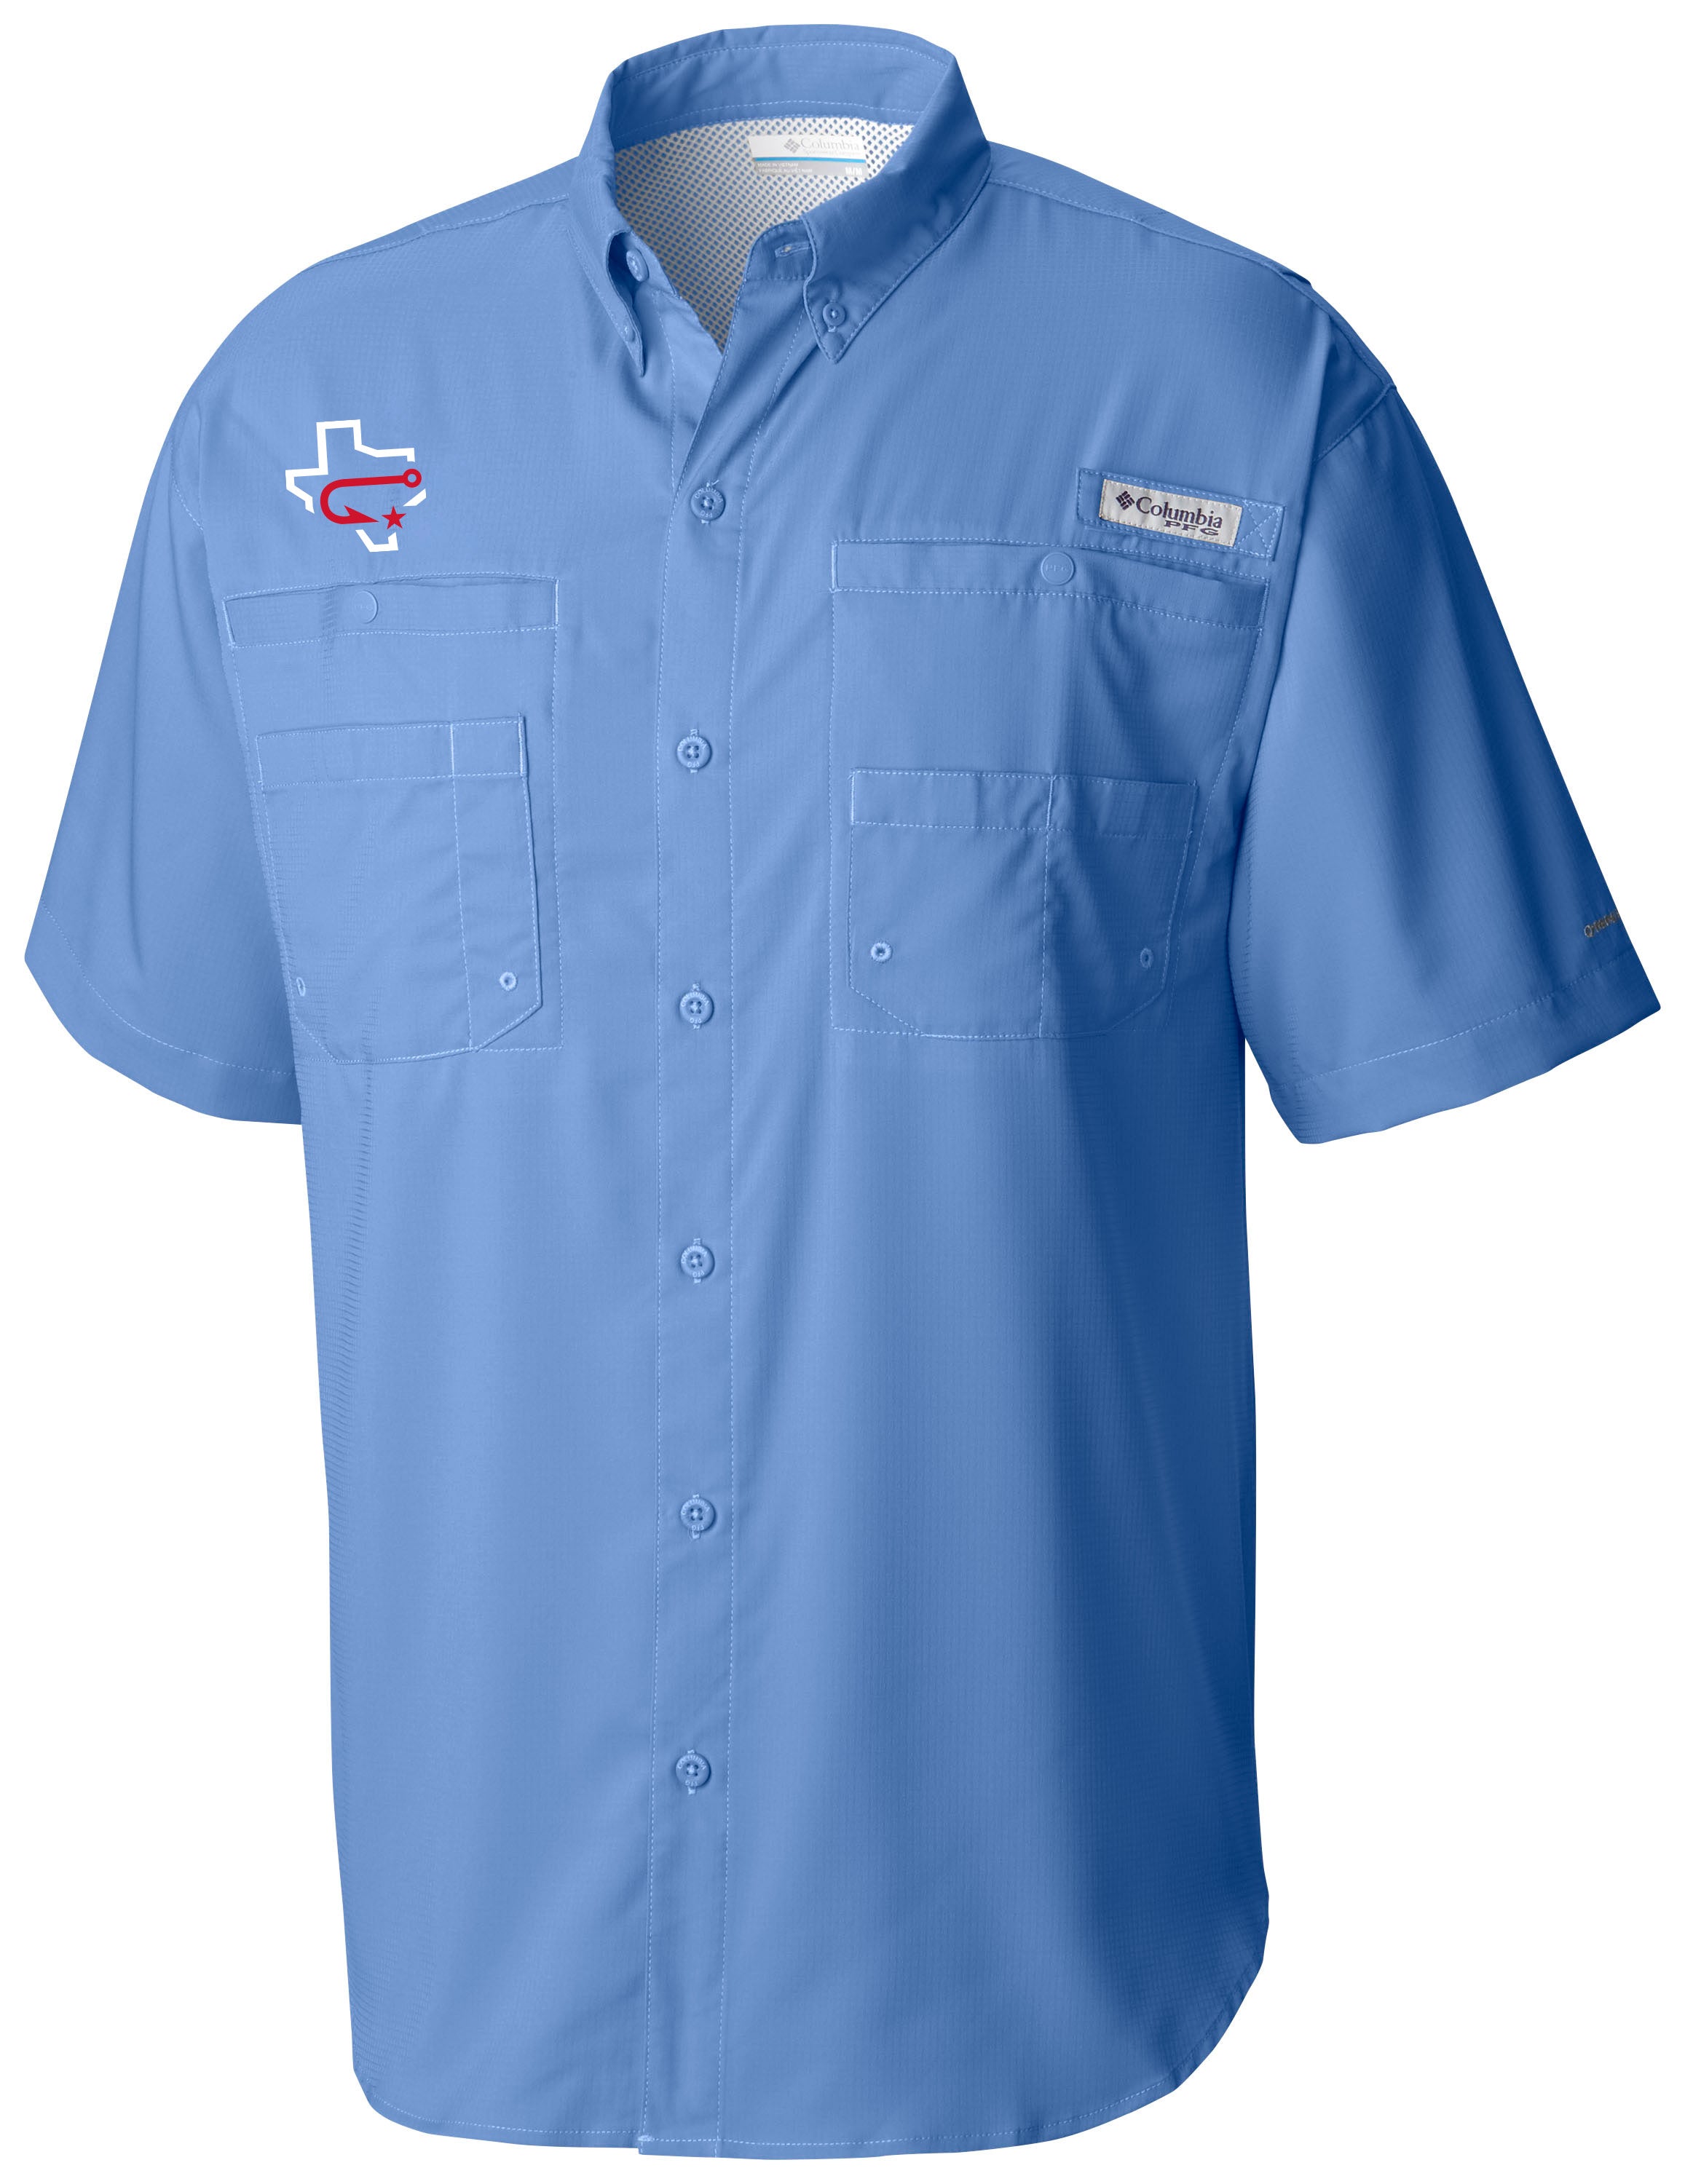 HOUSTON ASTROS COLUMBIA FISHING SHIRT for Sale in